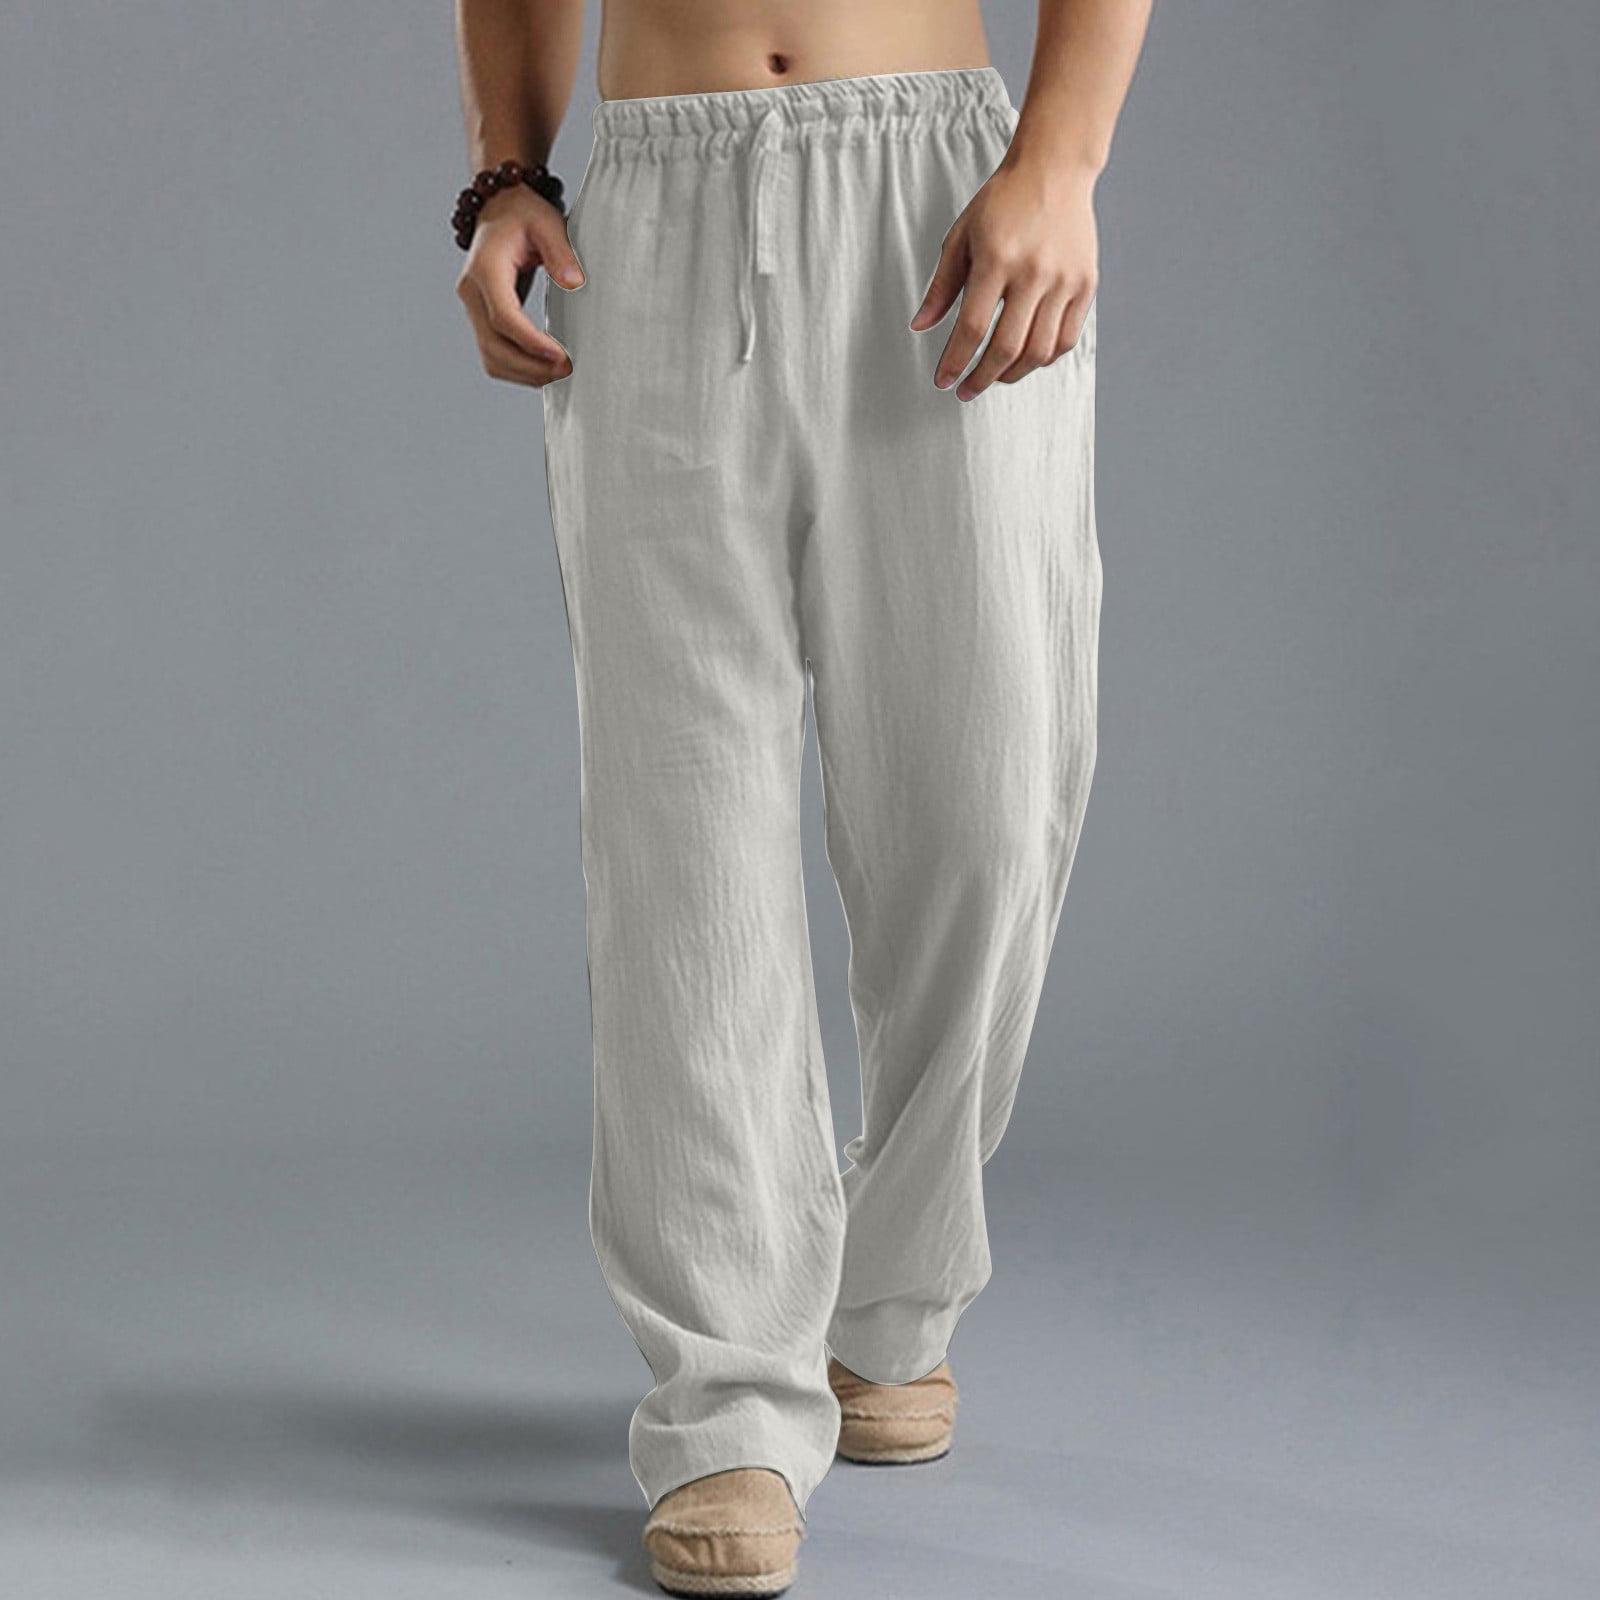 Men's Linen Pants  Summer Clothing in White, Also Available in